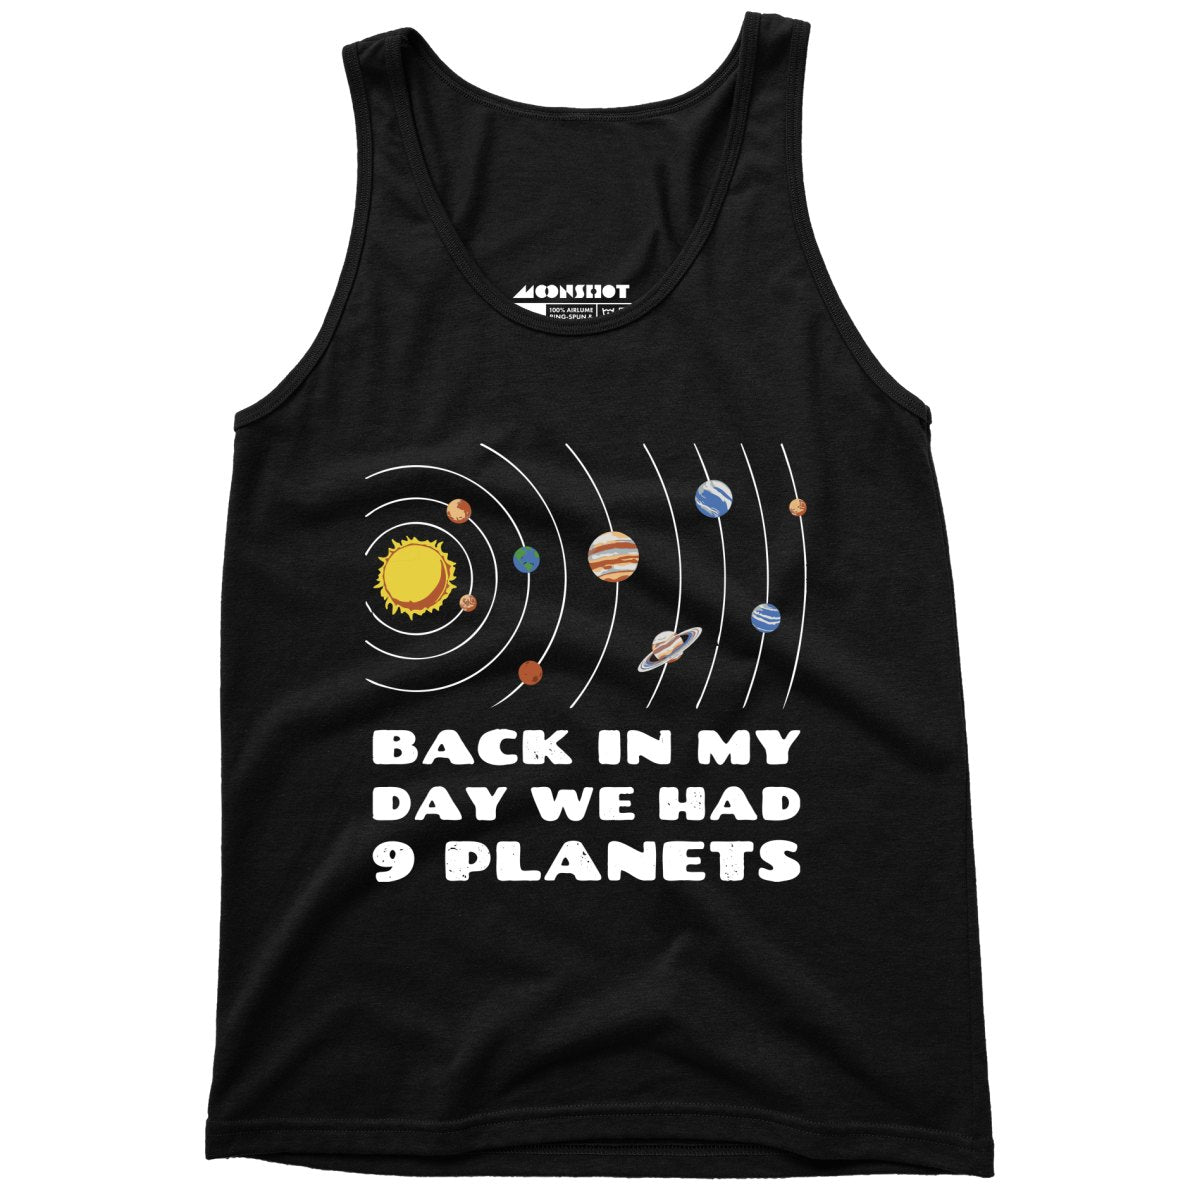 Back in My Day We Had 9 Planets - Unisex Tank Top